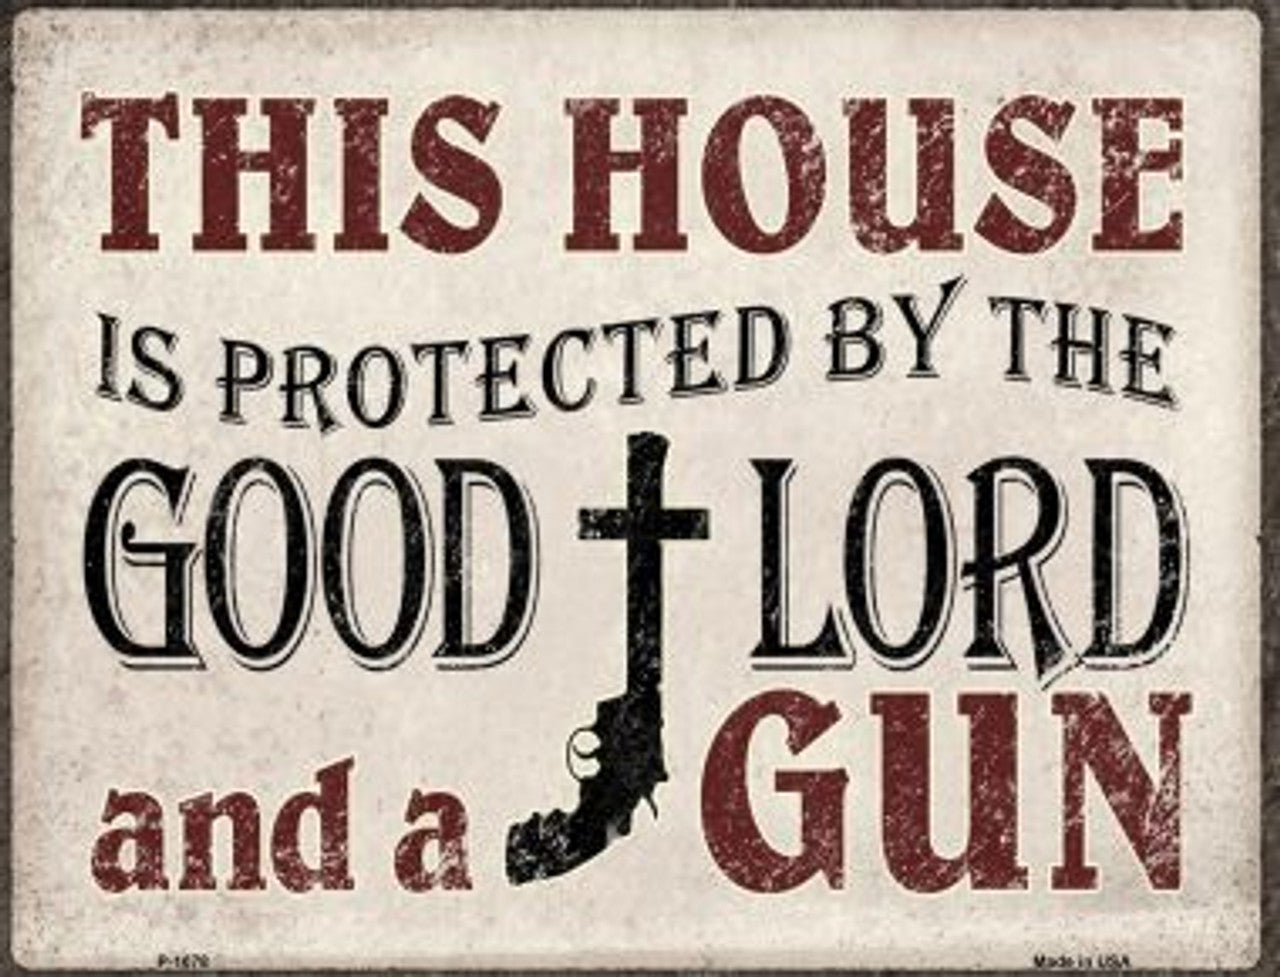 Protected By The Lord And Gun 9" x 12" Aluminum Metal Parking Sign - P-1078